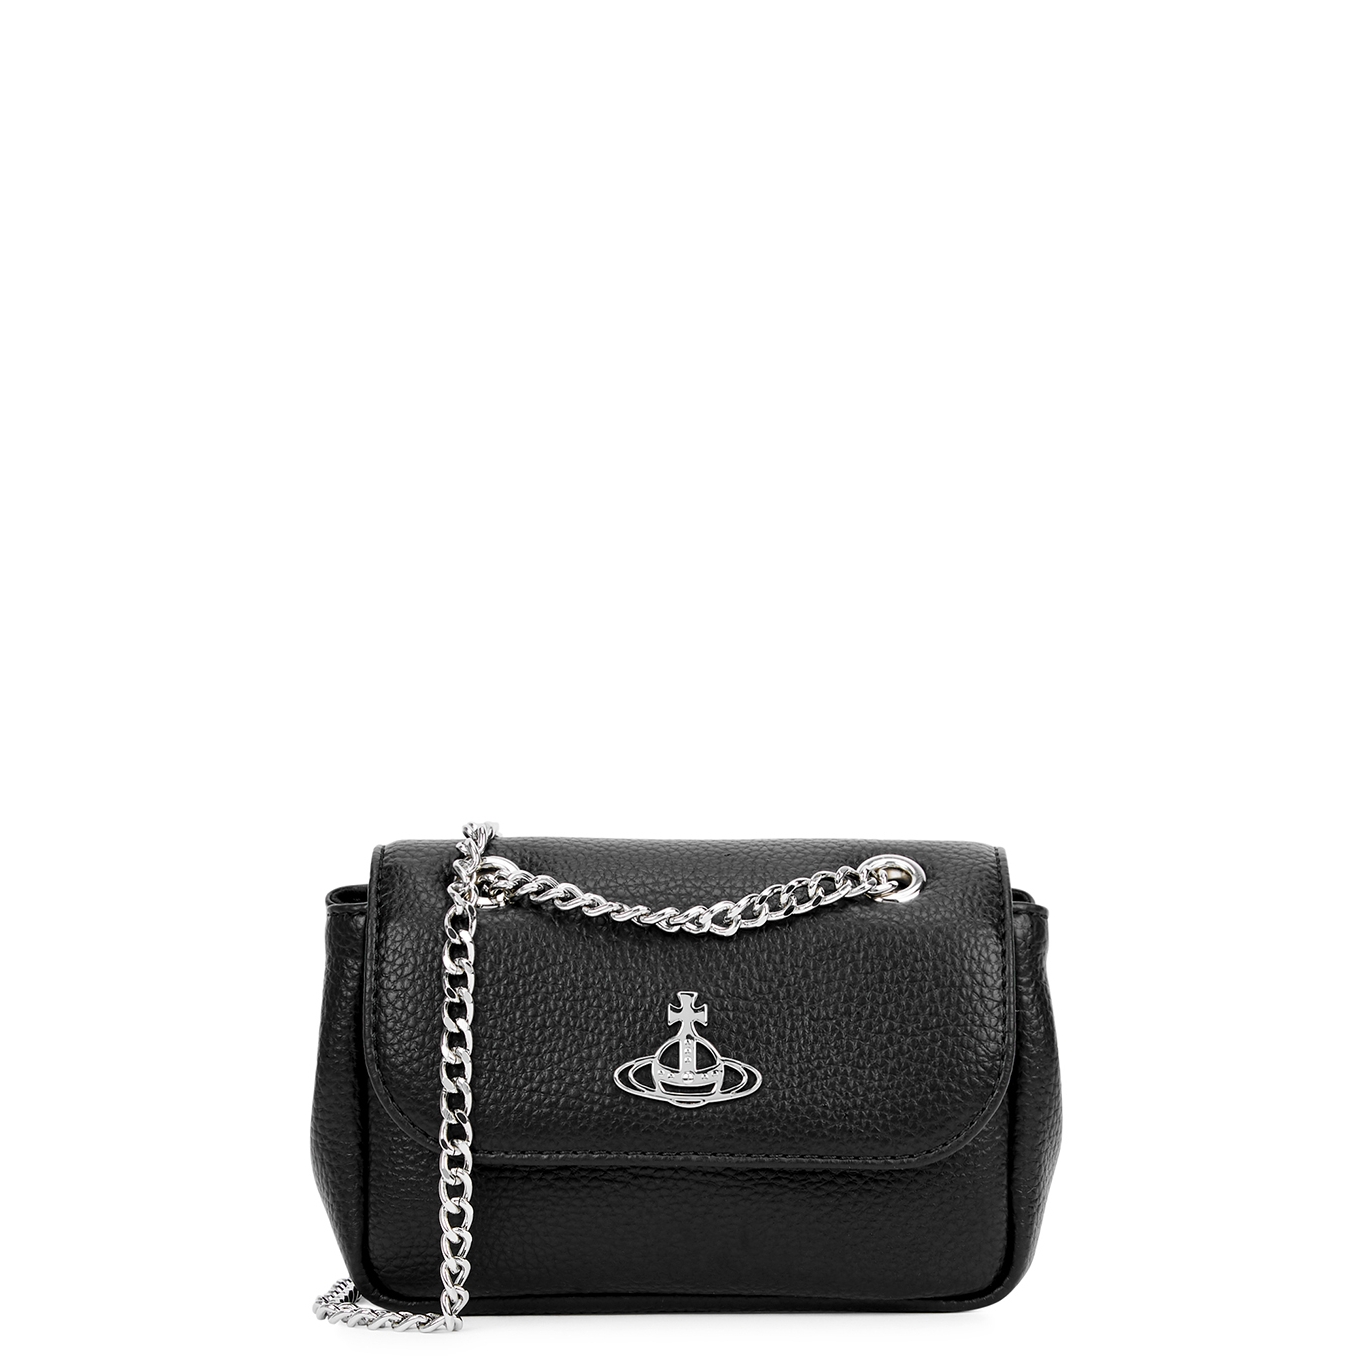 Vivienne Westwood Small Black Vegan Leather Cross-body Pouch